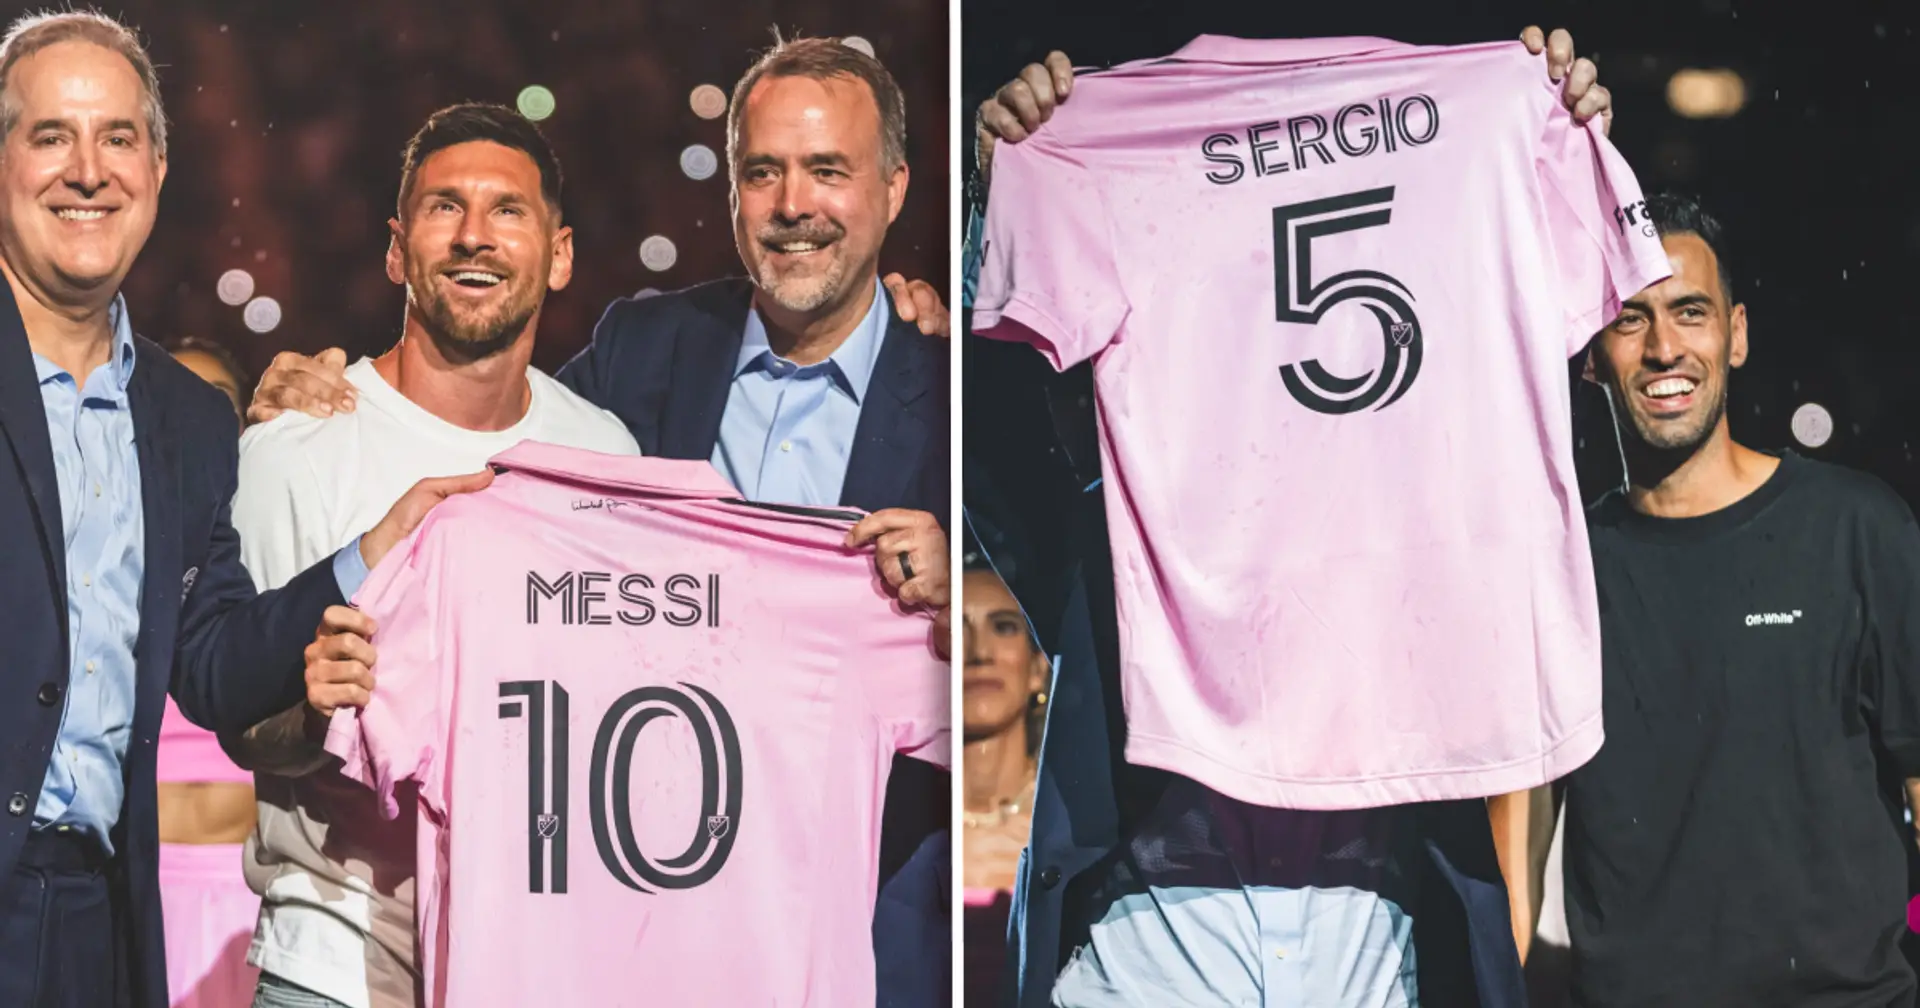 8 best pics and vids as Messi and Busquets are unveiled in packed Miami stadium 